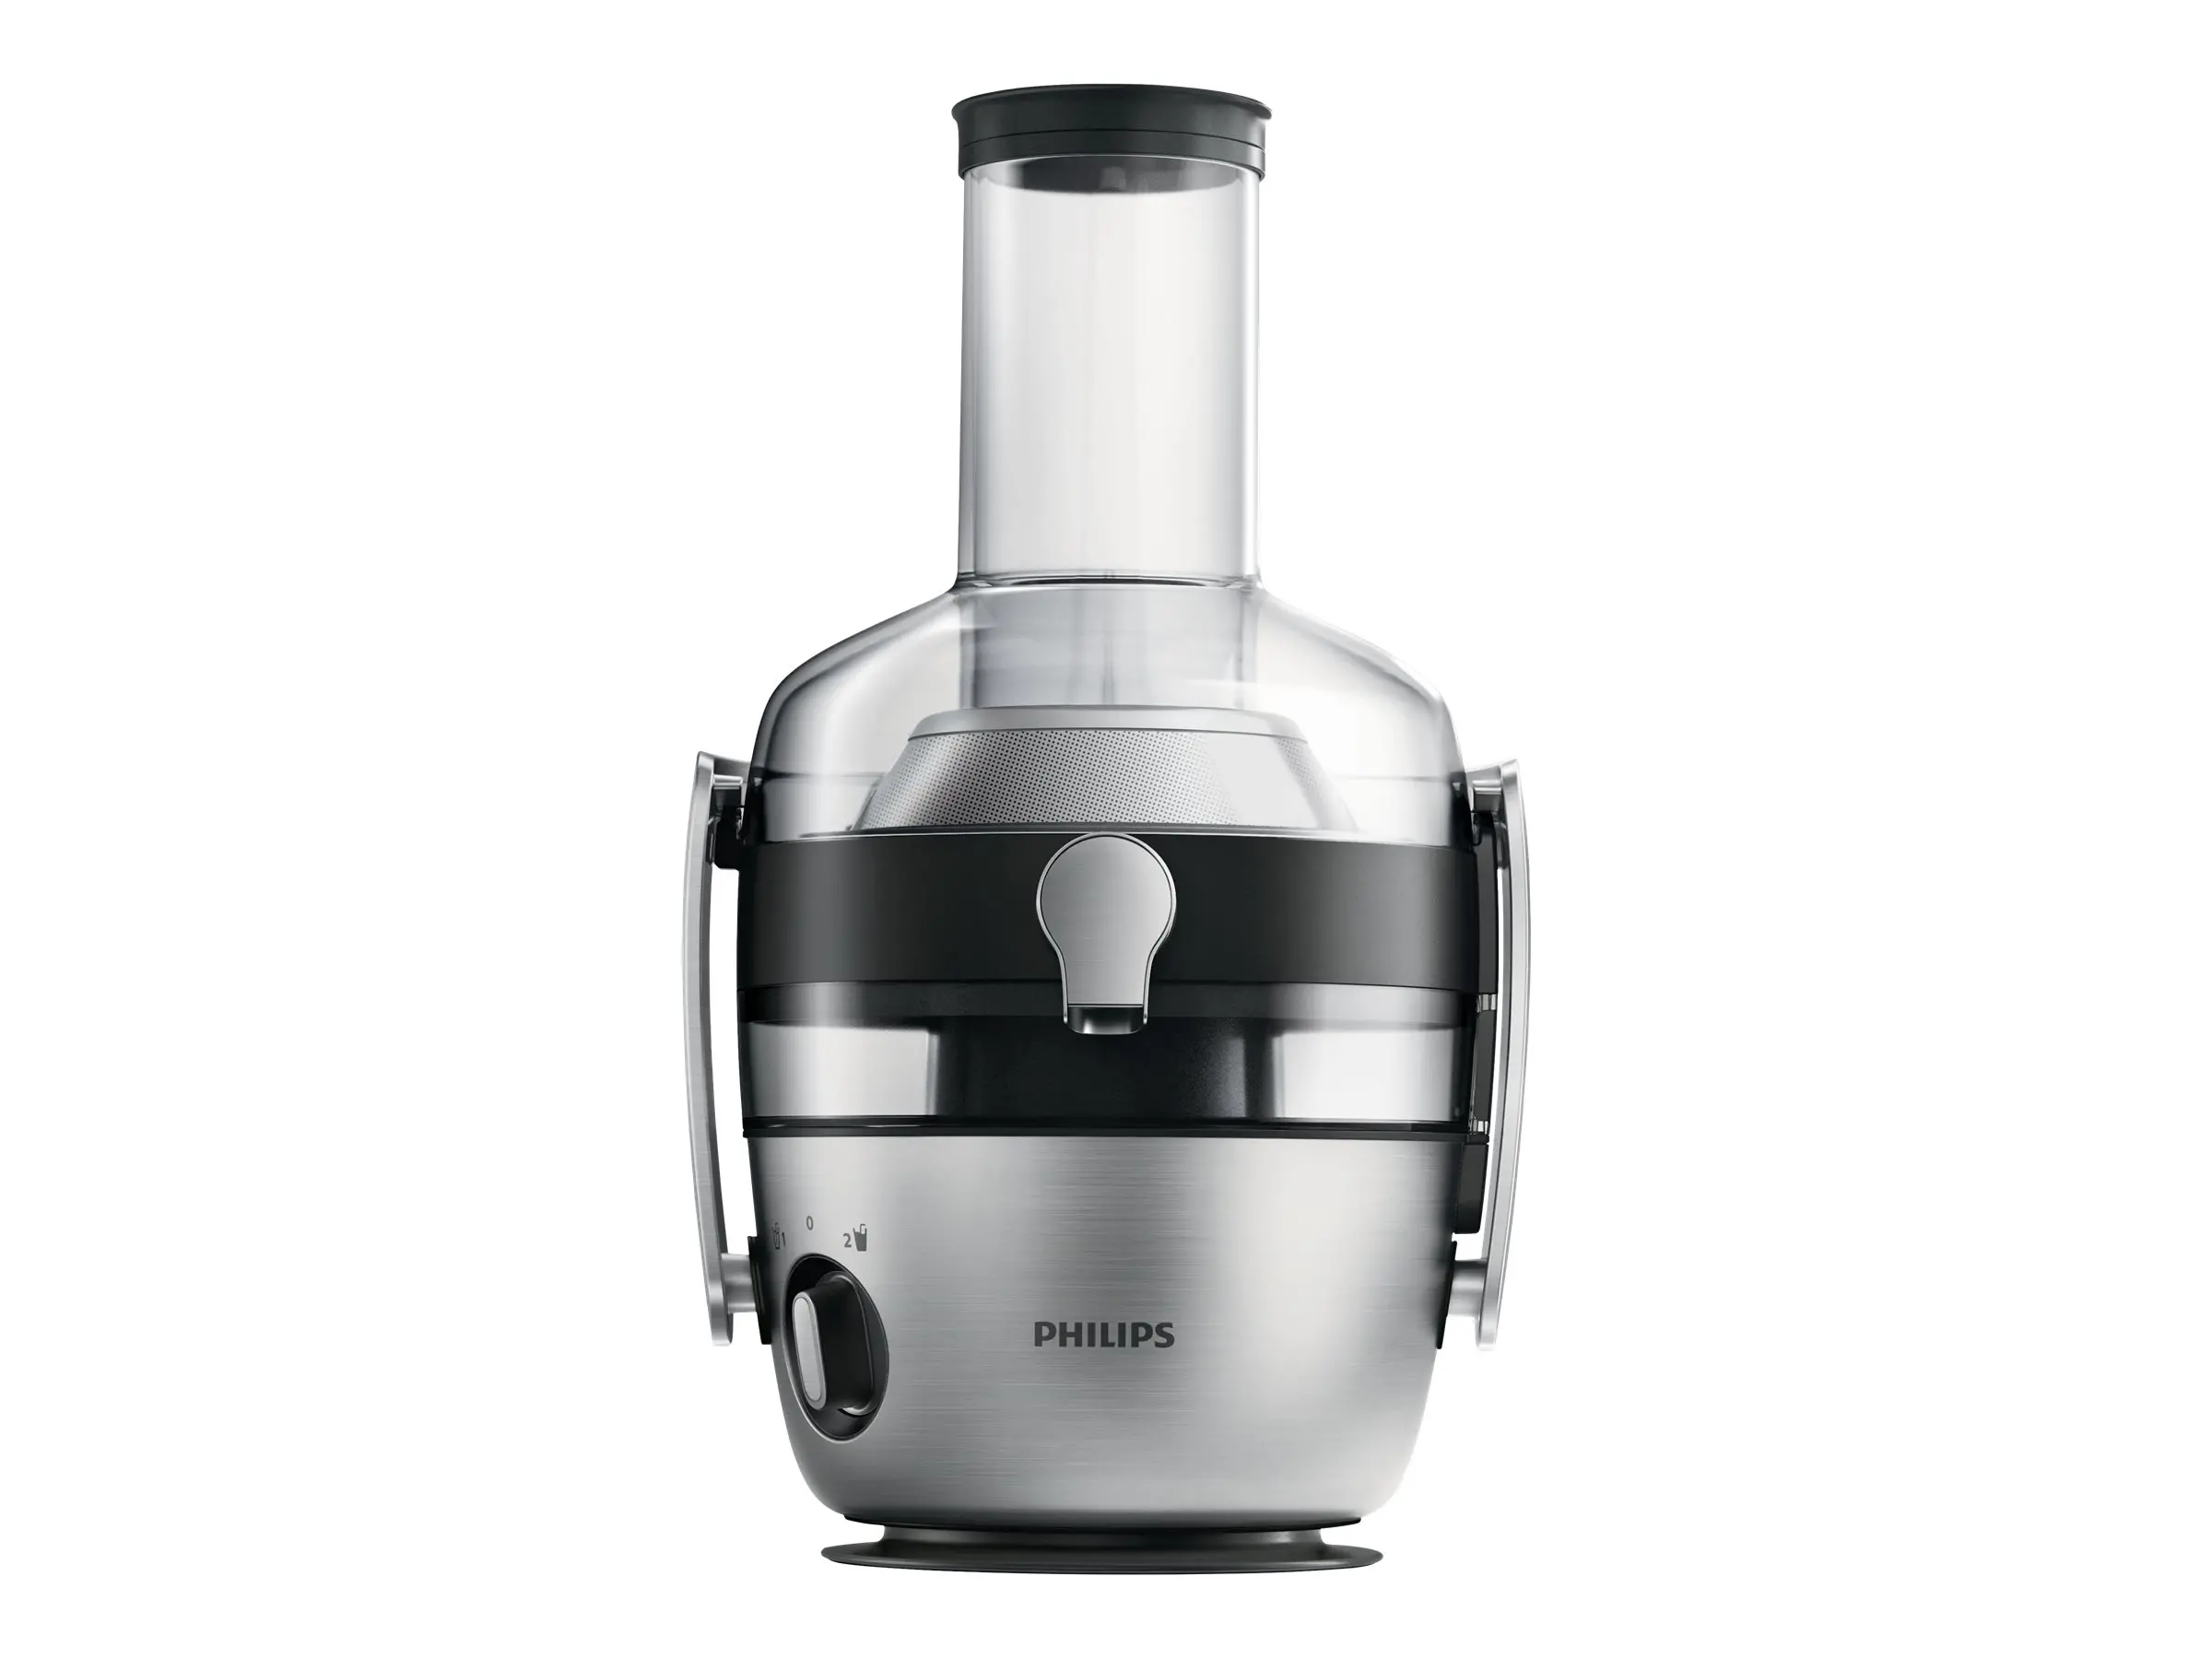 PHILIPS Avance Collection juicer QuickClean 1200W XXL tube - image 8